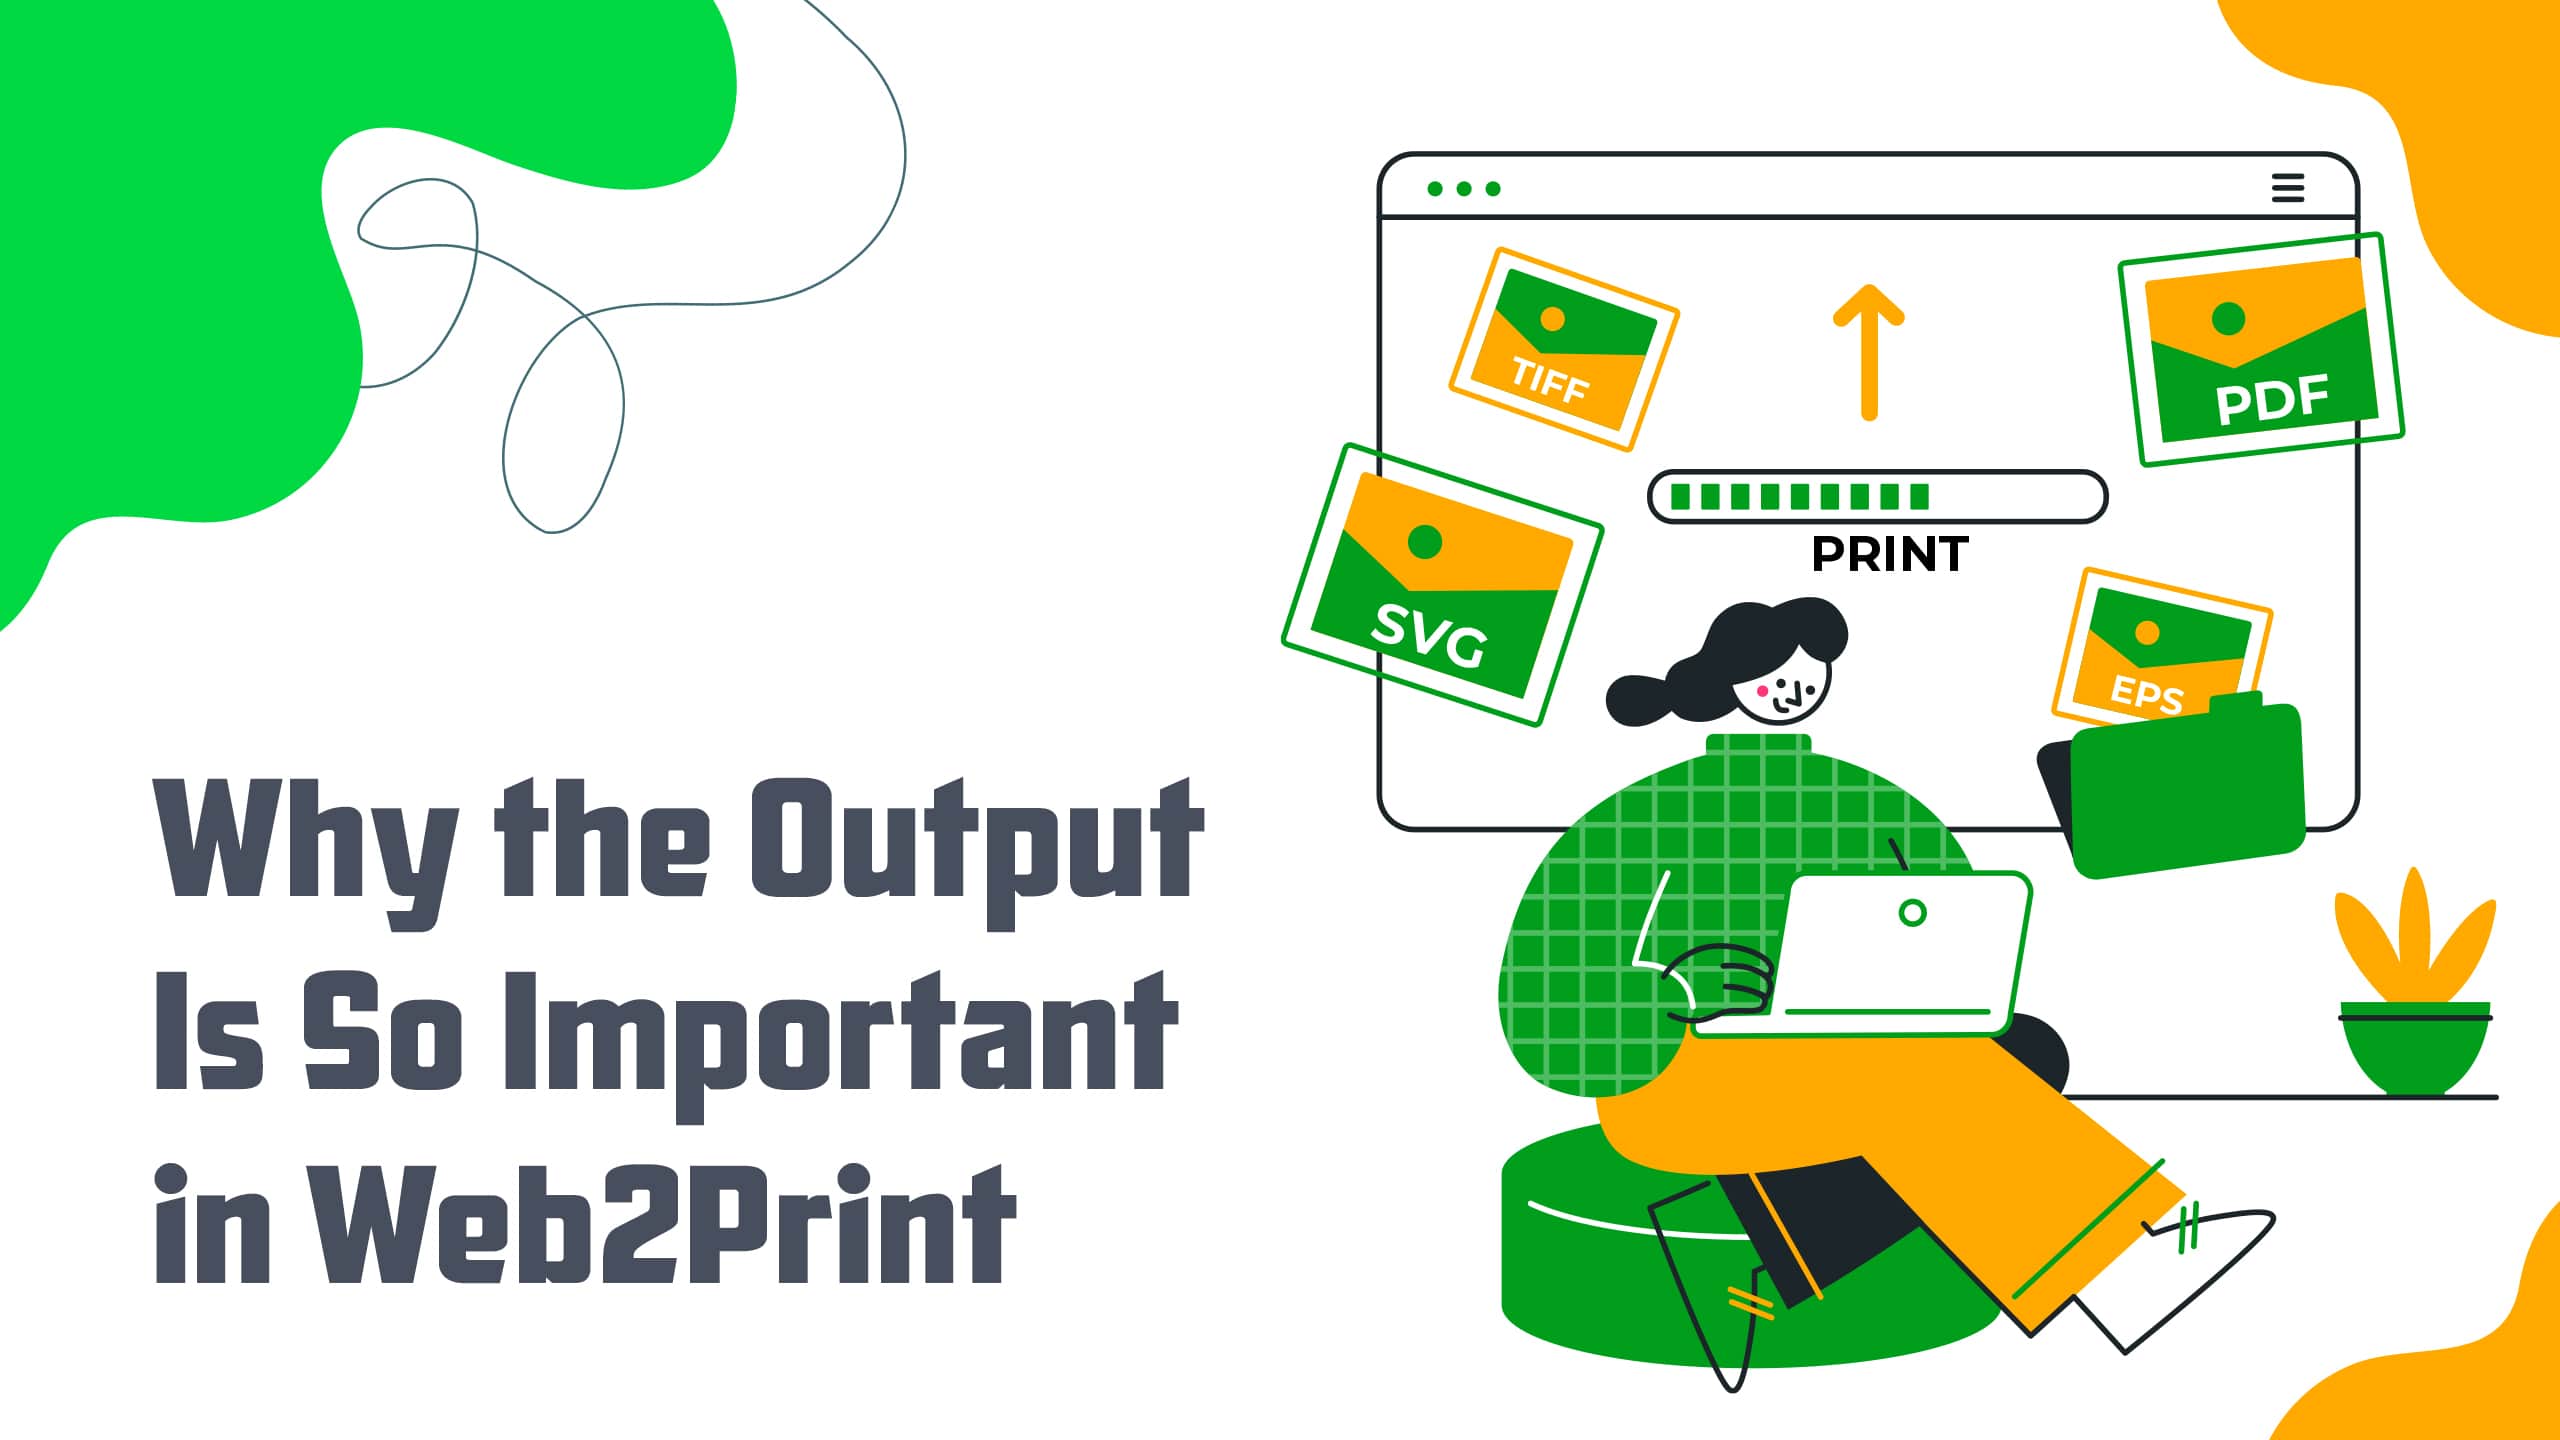 Why the Output Is So Important in Web2Print